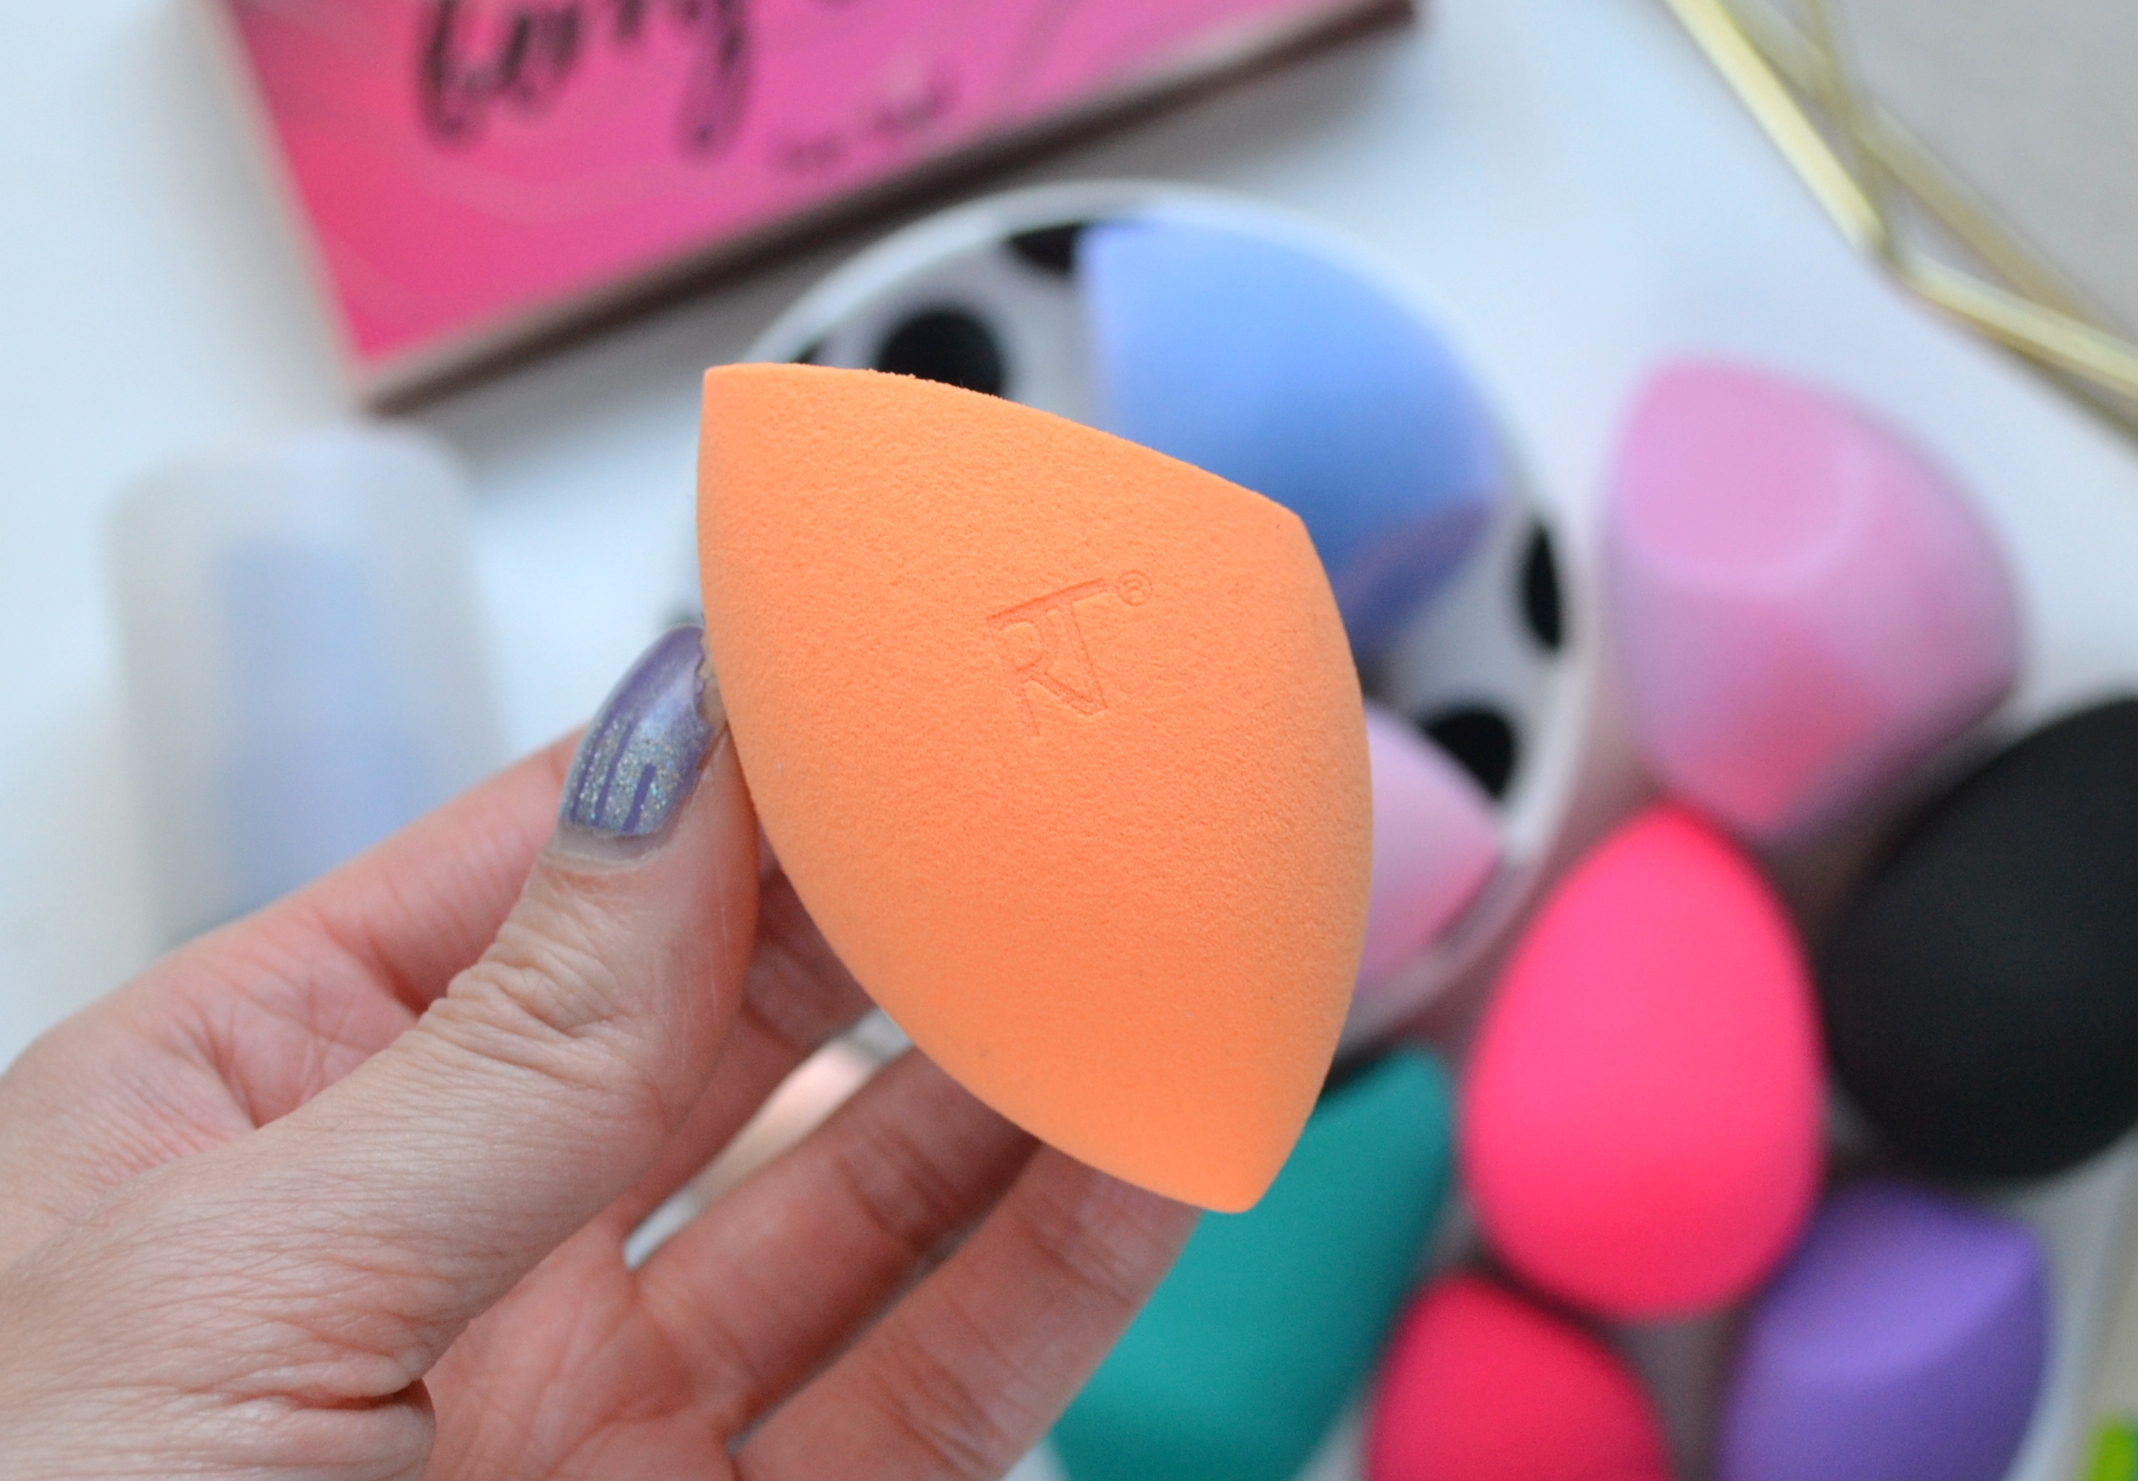 Produktiv Ærlighed Dom MAKEUP | Beauty Sponge Showdown featuring Beautyblender, Real Techniques,  Sephora and Juno & Co. | Cosmetic Proof | Vancouver beauty, nail art and  lifestyle blog